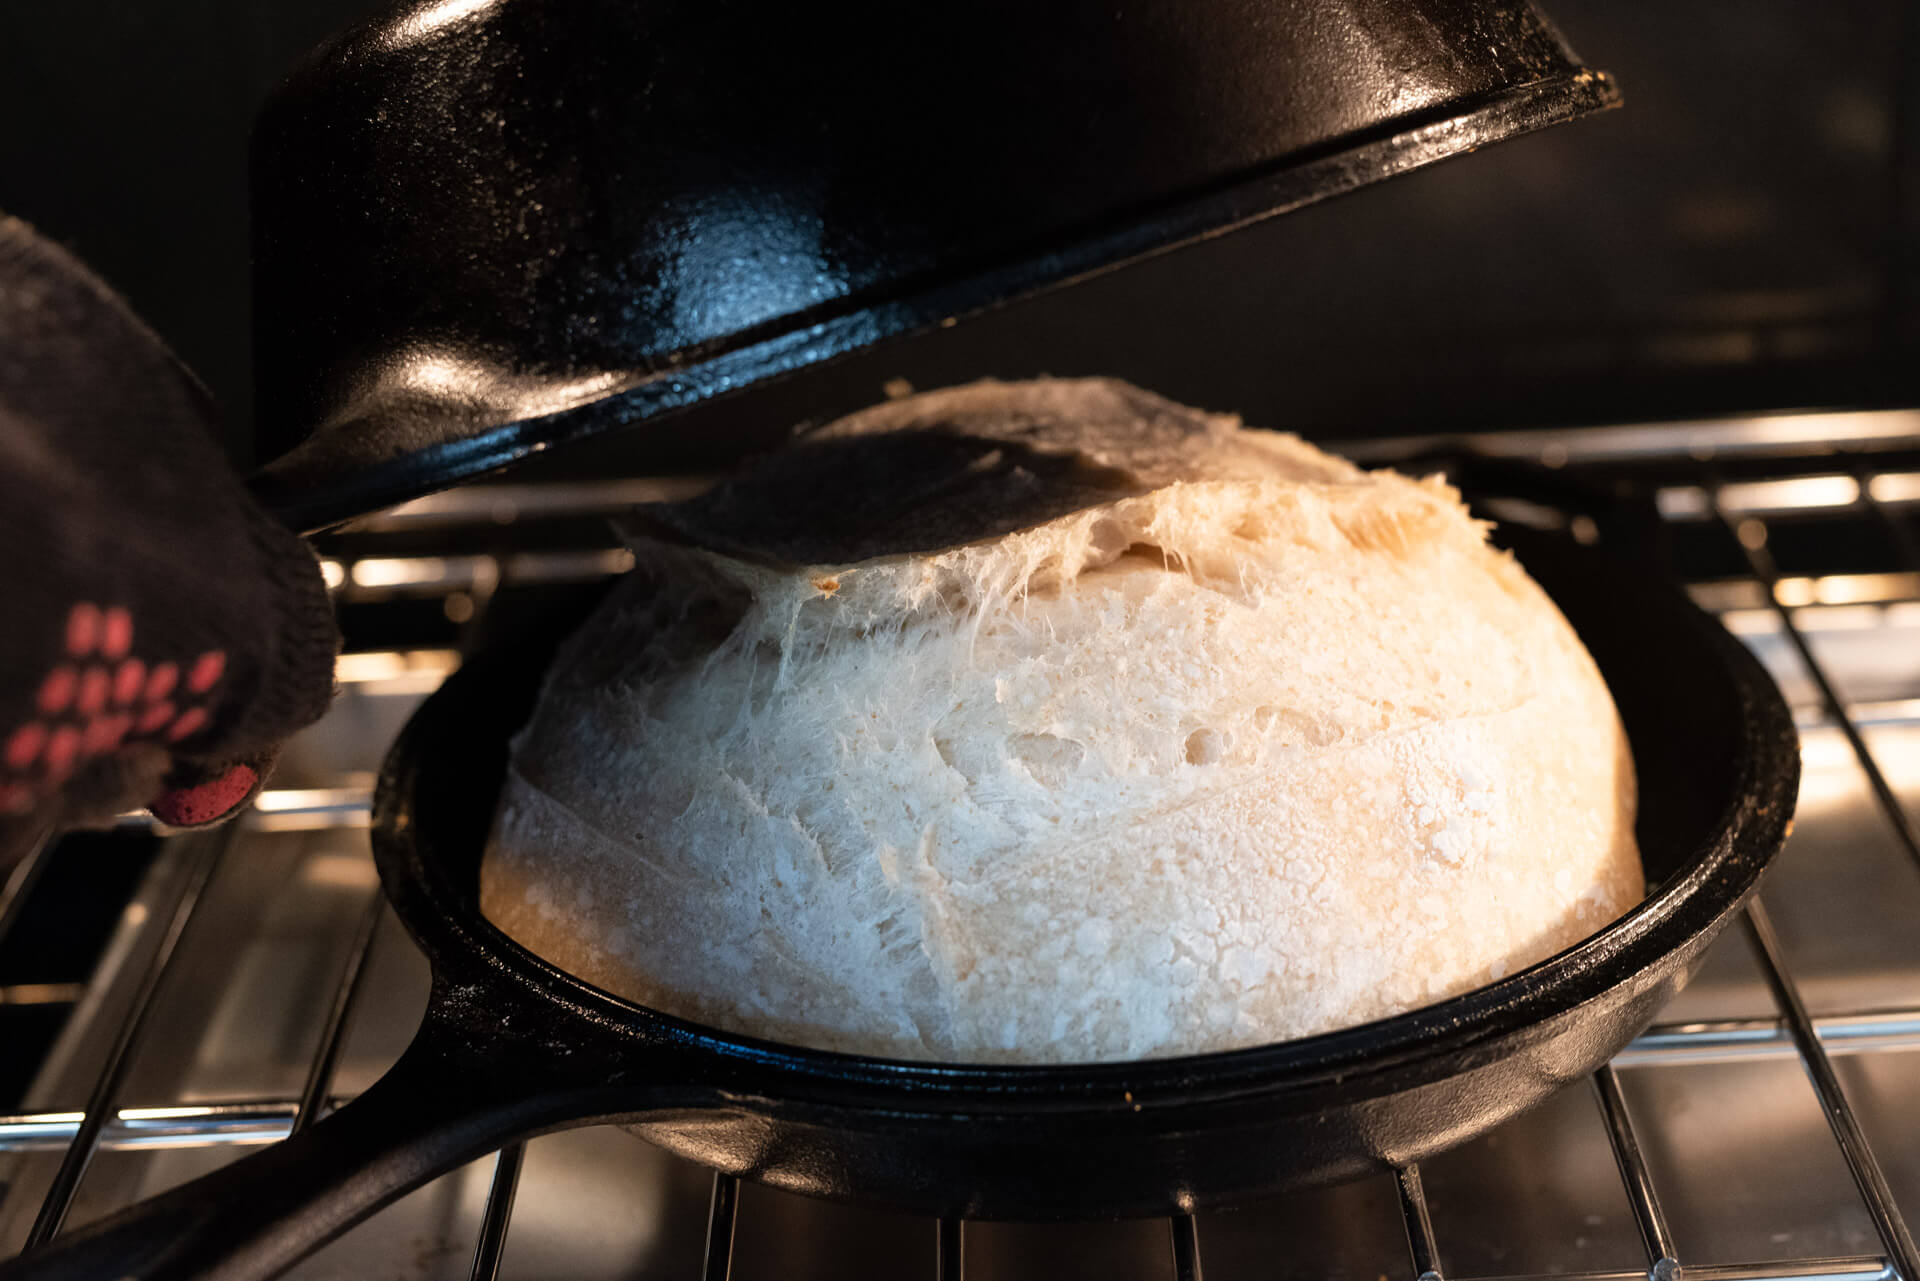 https://www.theperfectloaf.com/wp-content/uploads/2019/01/theperfectloaf-baking-bread-in-a-dutch-oven-feature-8.jpg